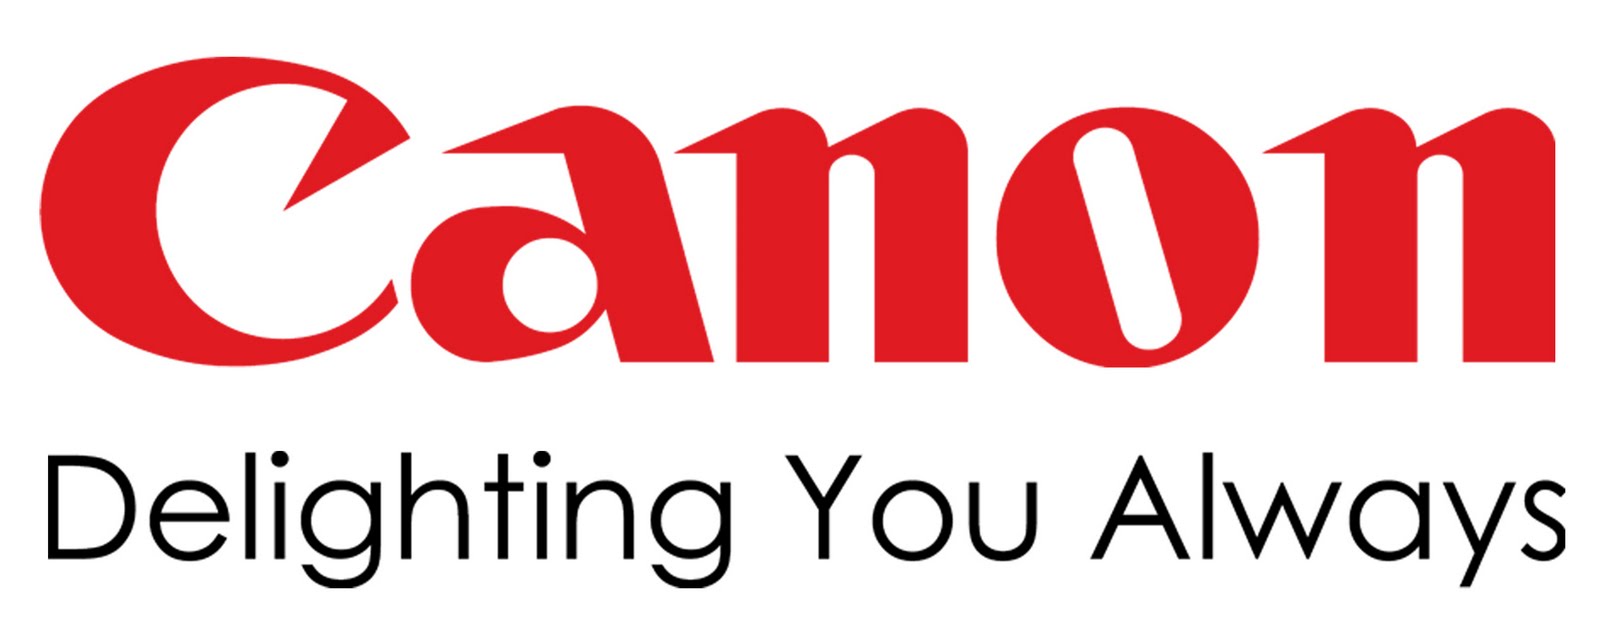 Canon Now Accepts Entries for